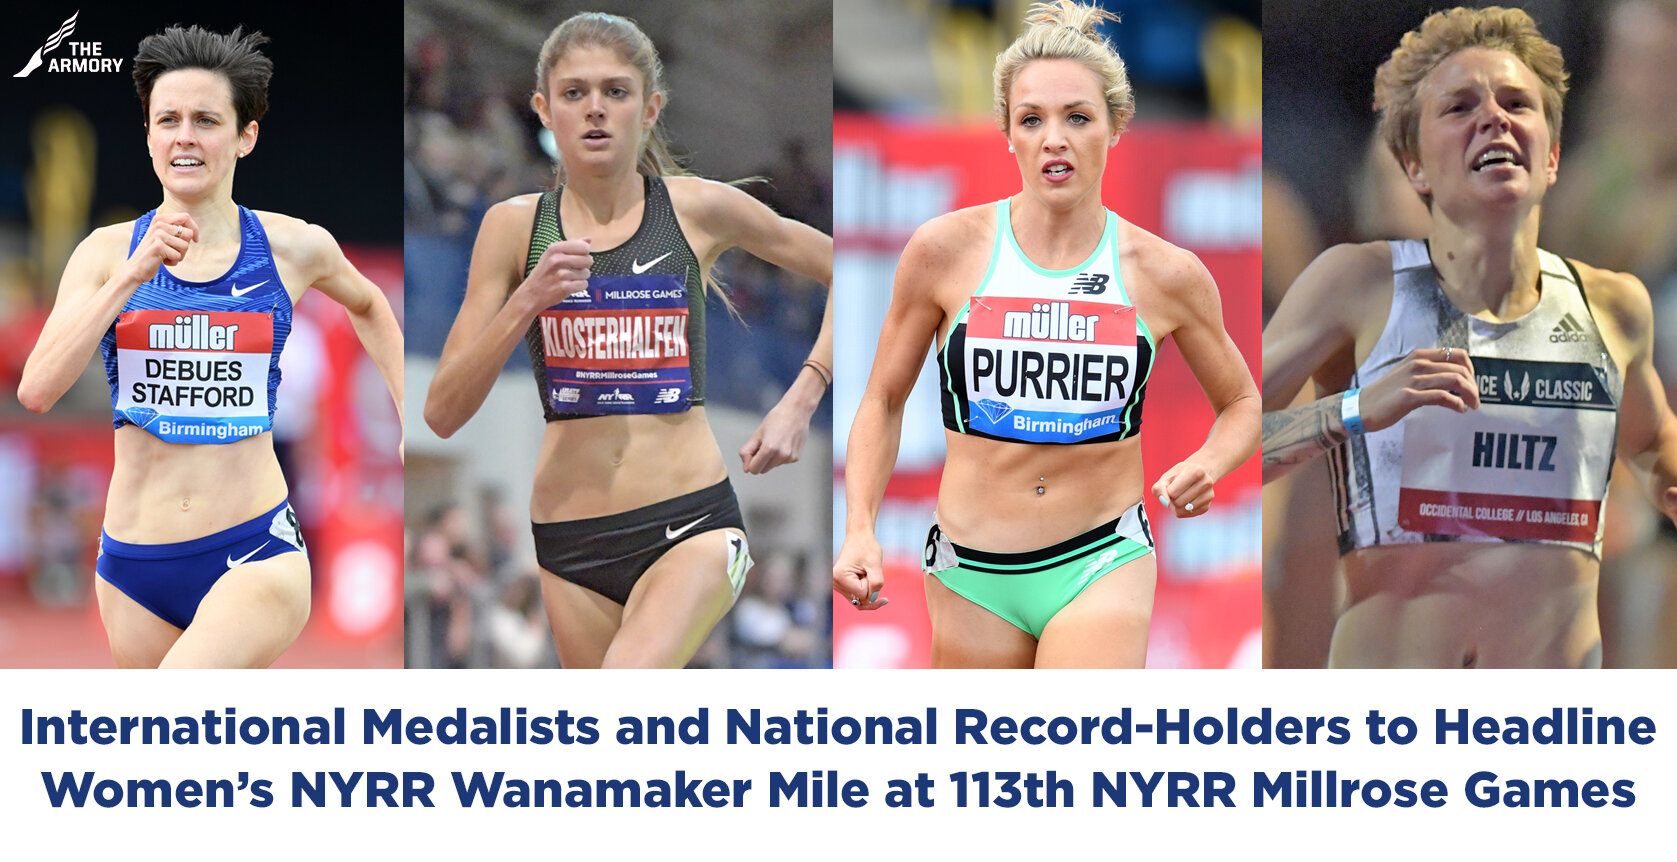 International Medalists and National Record-Holders to Headline Womens NYRR Wanamaker Mile at 113th NYRR Millrose Games on February 8 — 115th Millrose Games